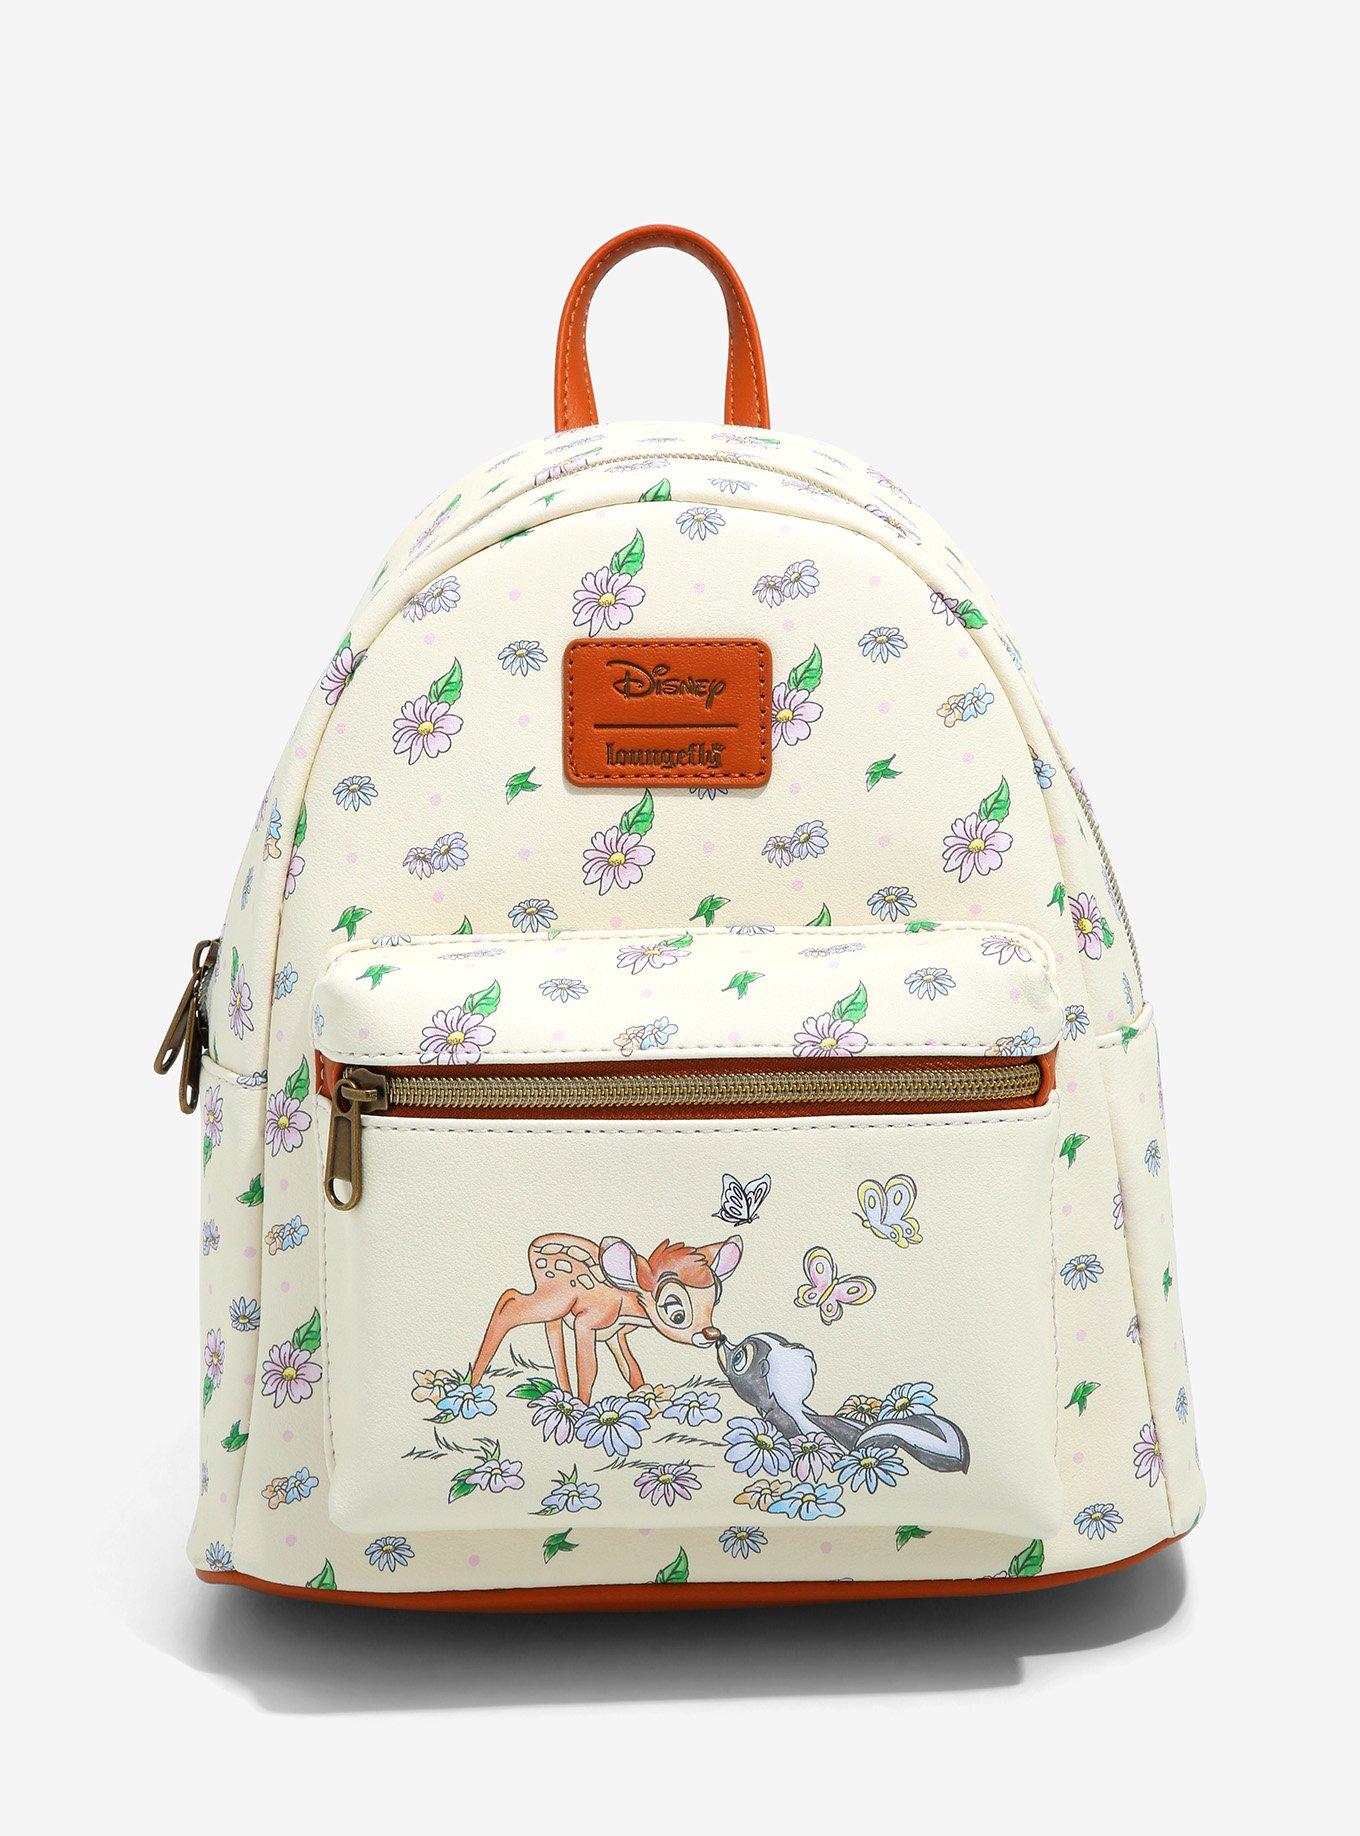 DISNEY - Minnie Mickey Floral - Mini Backpack LoungeFly Exclusive Ed :  : Bag Loungefly DISNEY